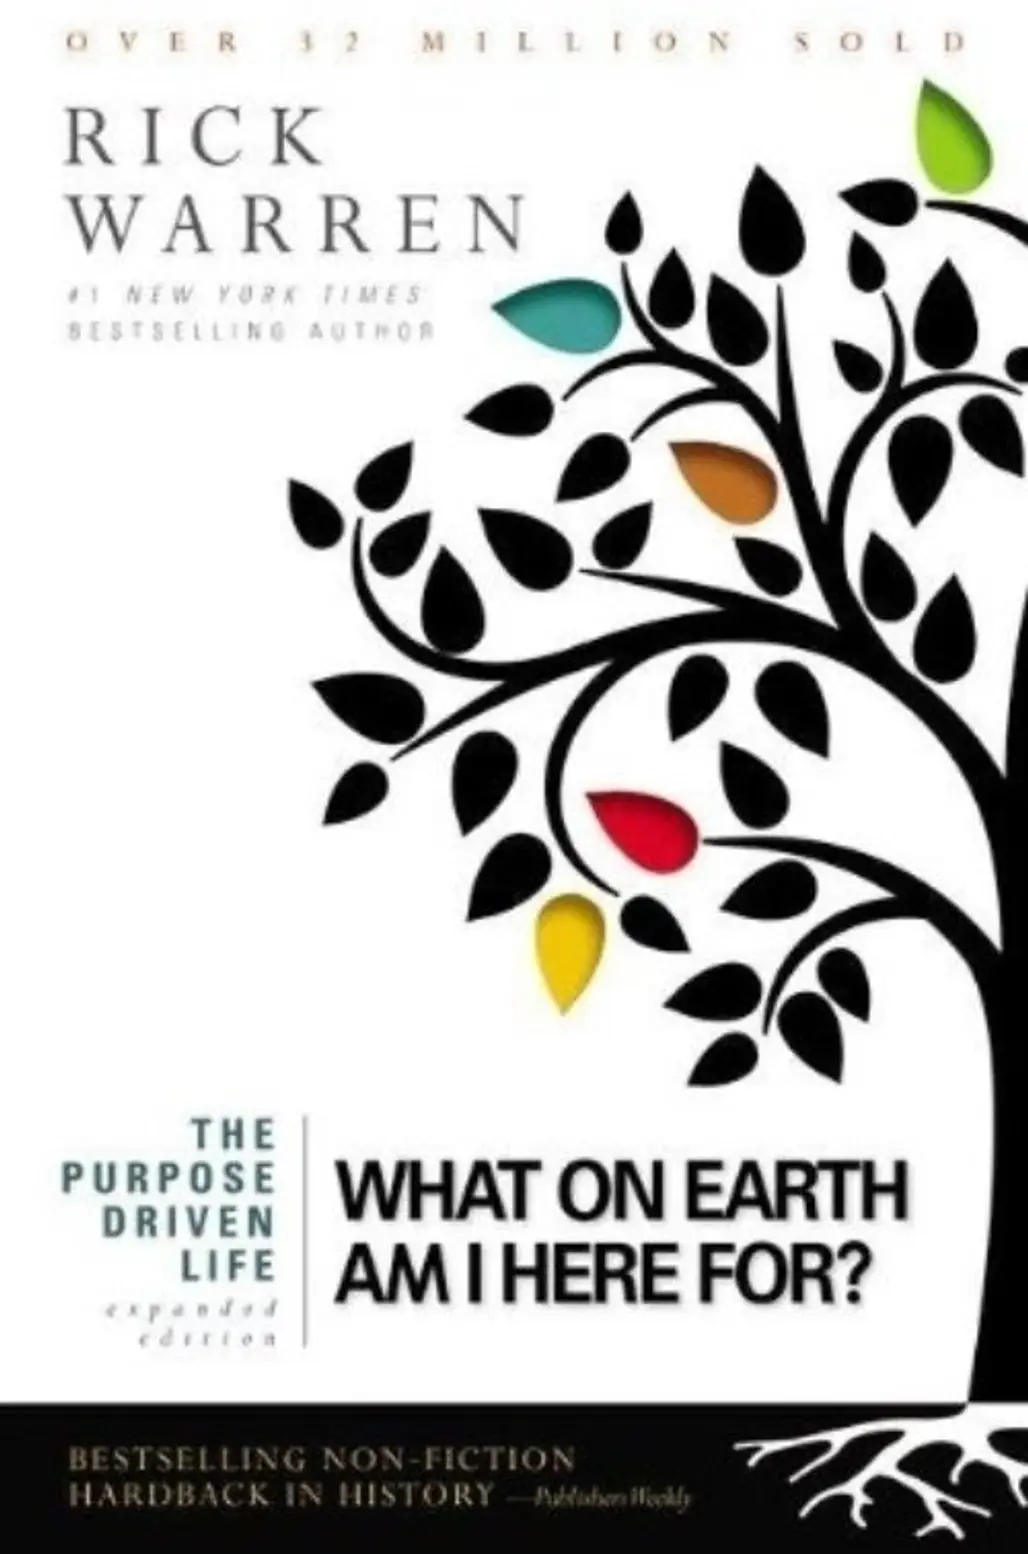 The Purpose Driven Life: What on Earth Am I Here For?,font,advertising,brand,pattern,